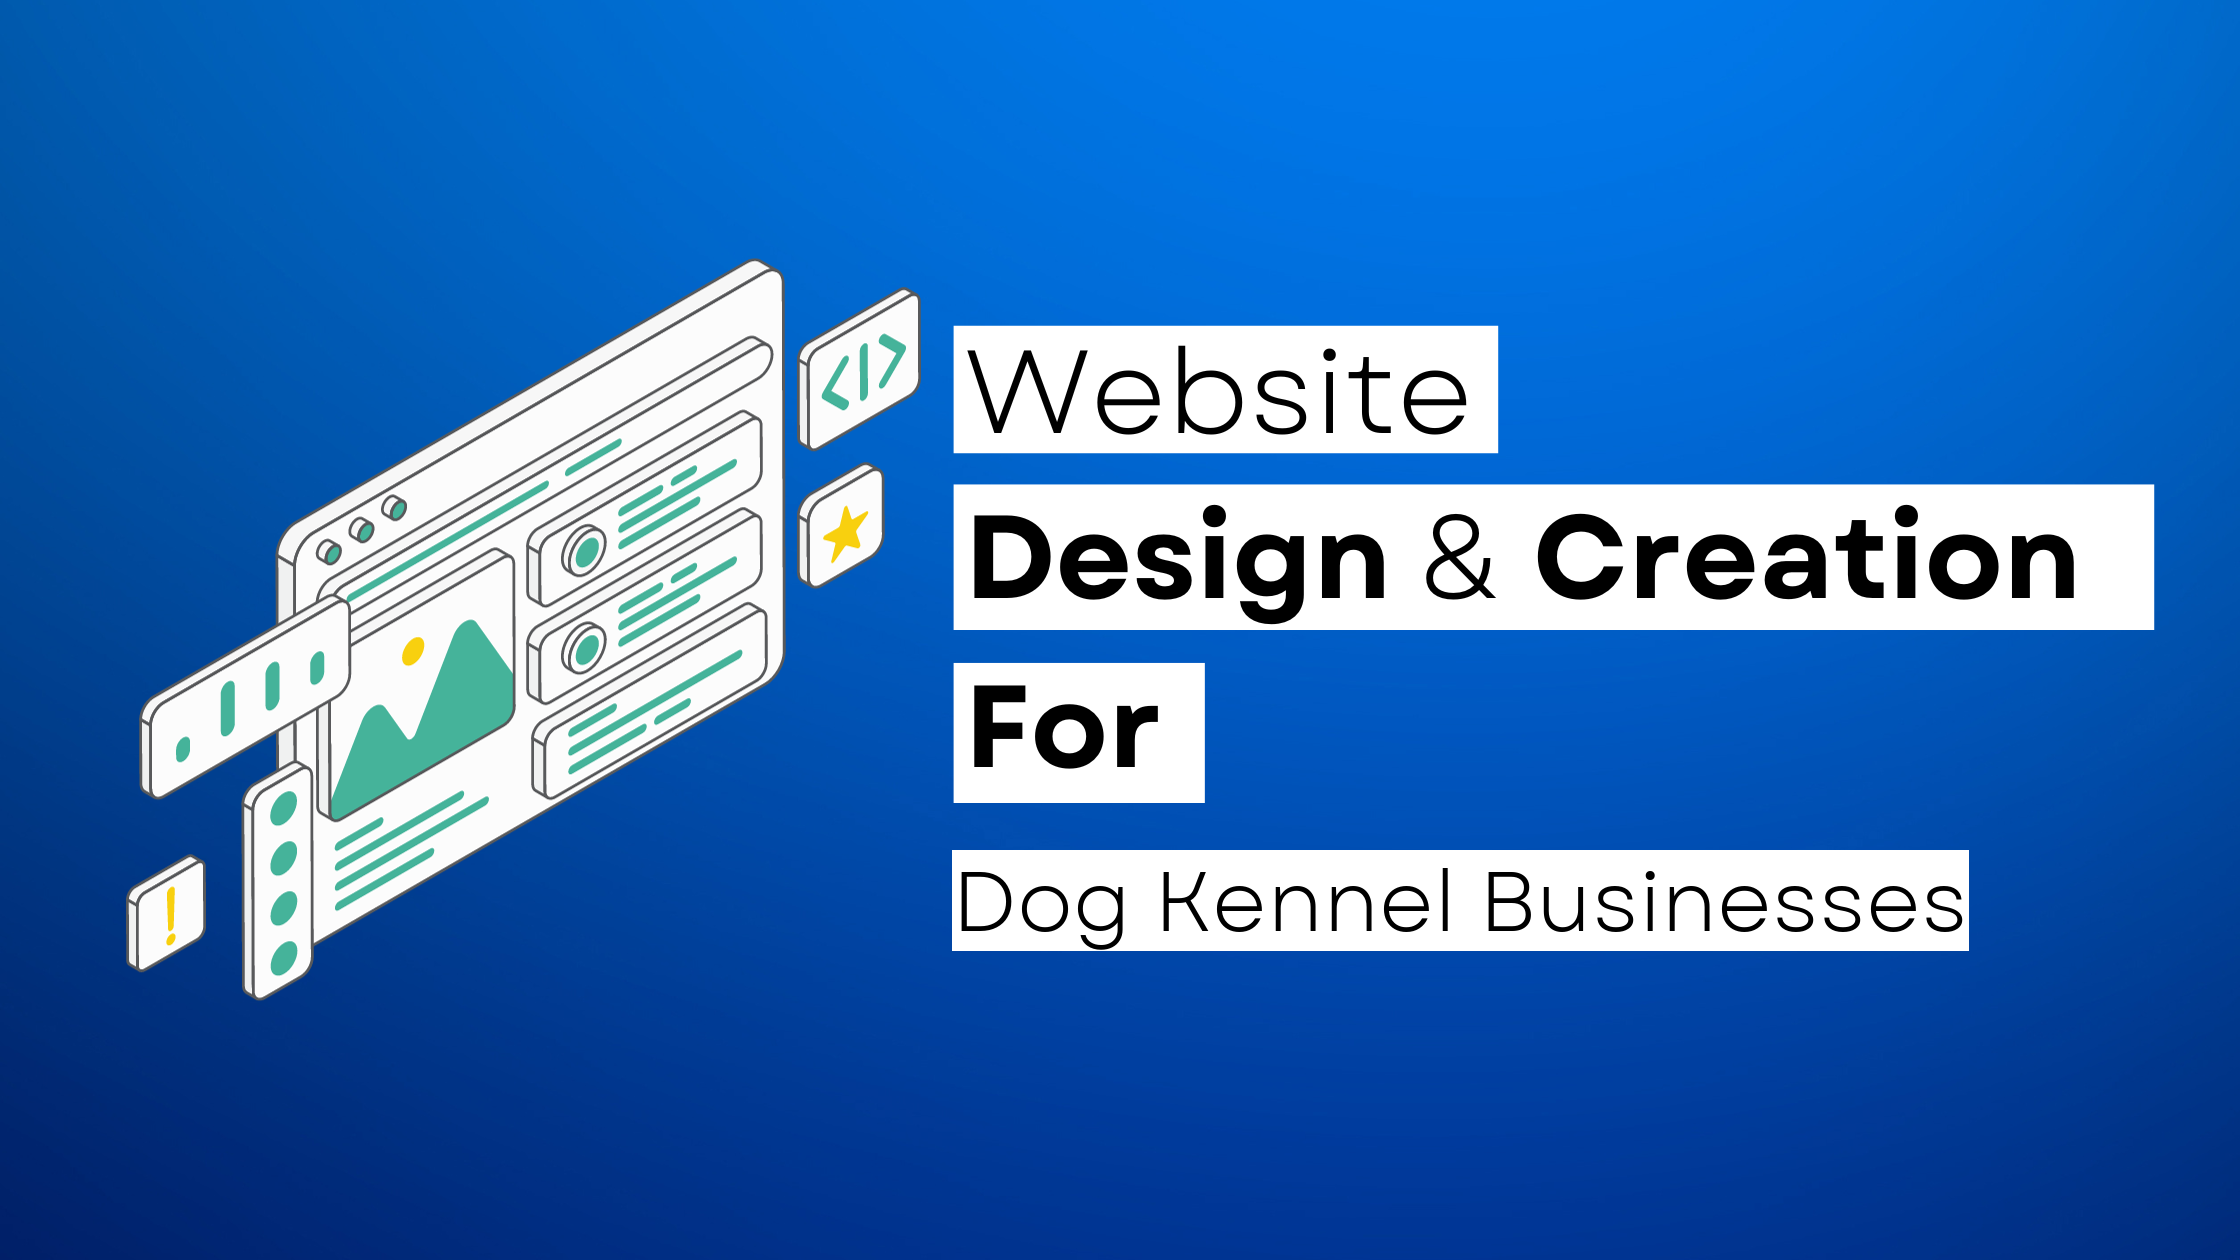 How to start a Dog Kennel website